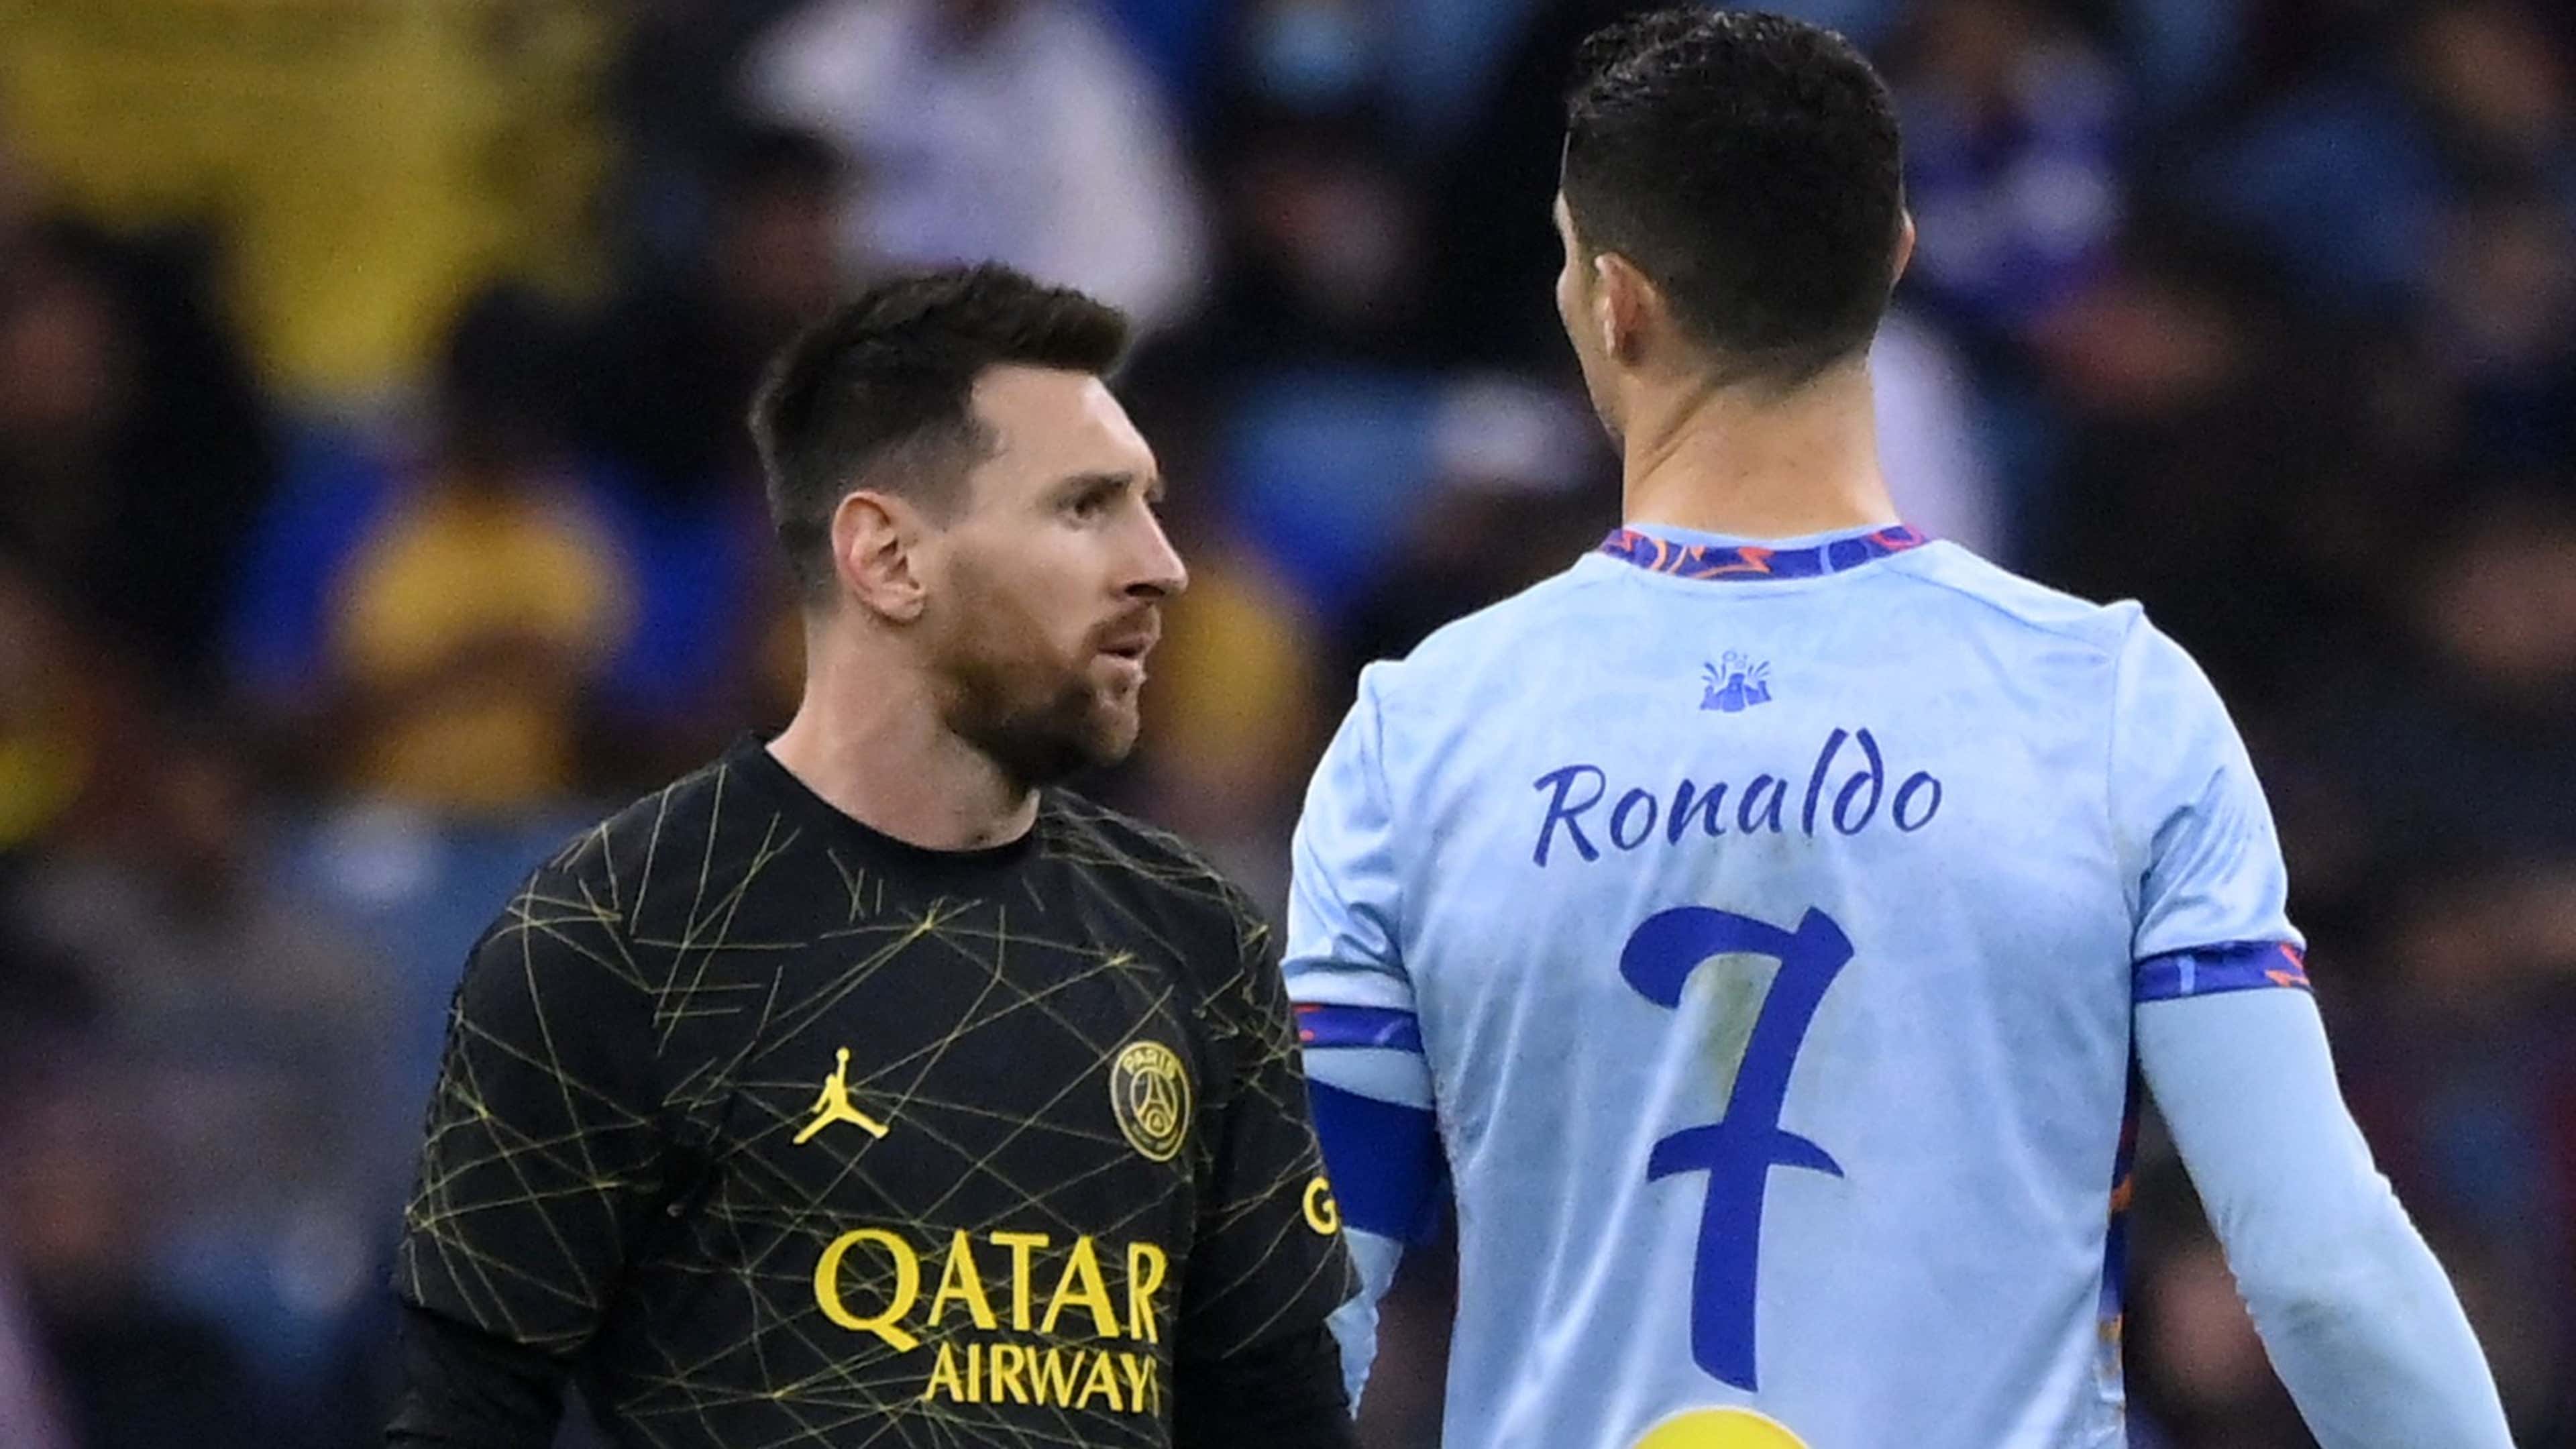 Lionel Messi Unsure If He and Cristiano Ronaldo Could Be Good